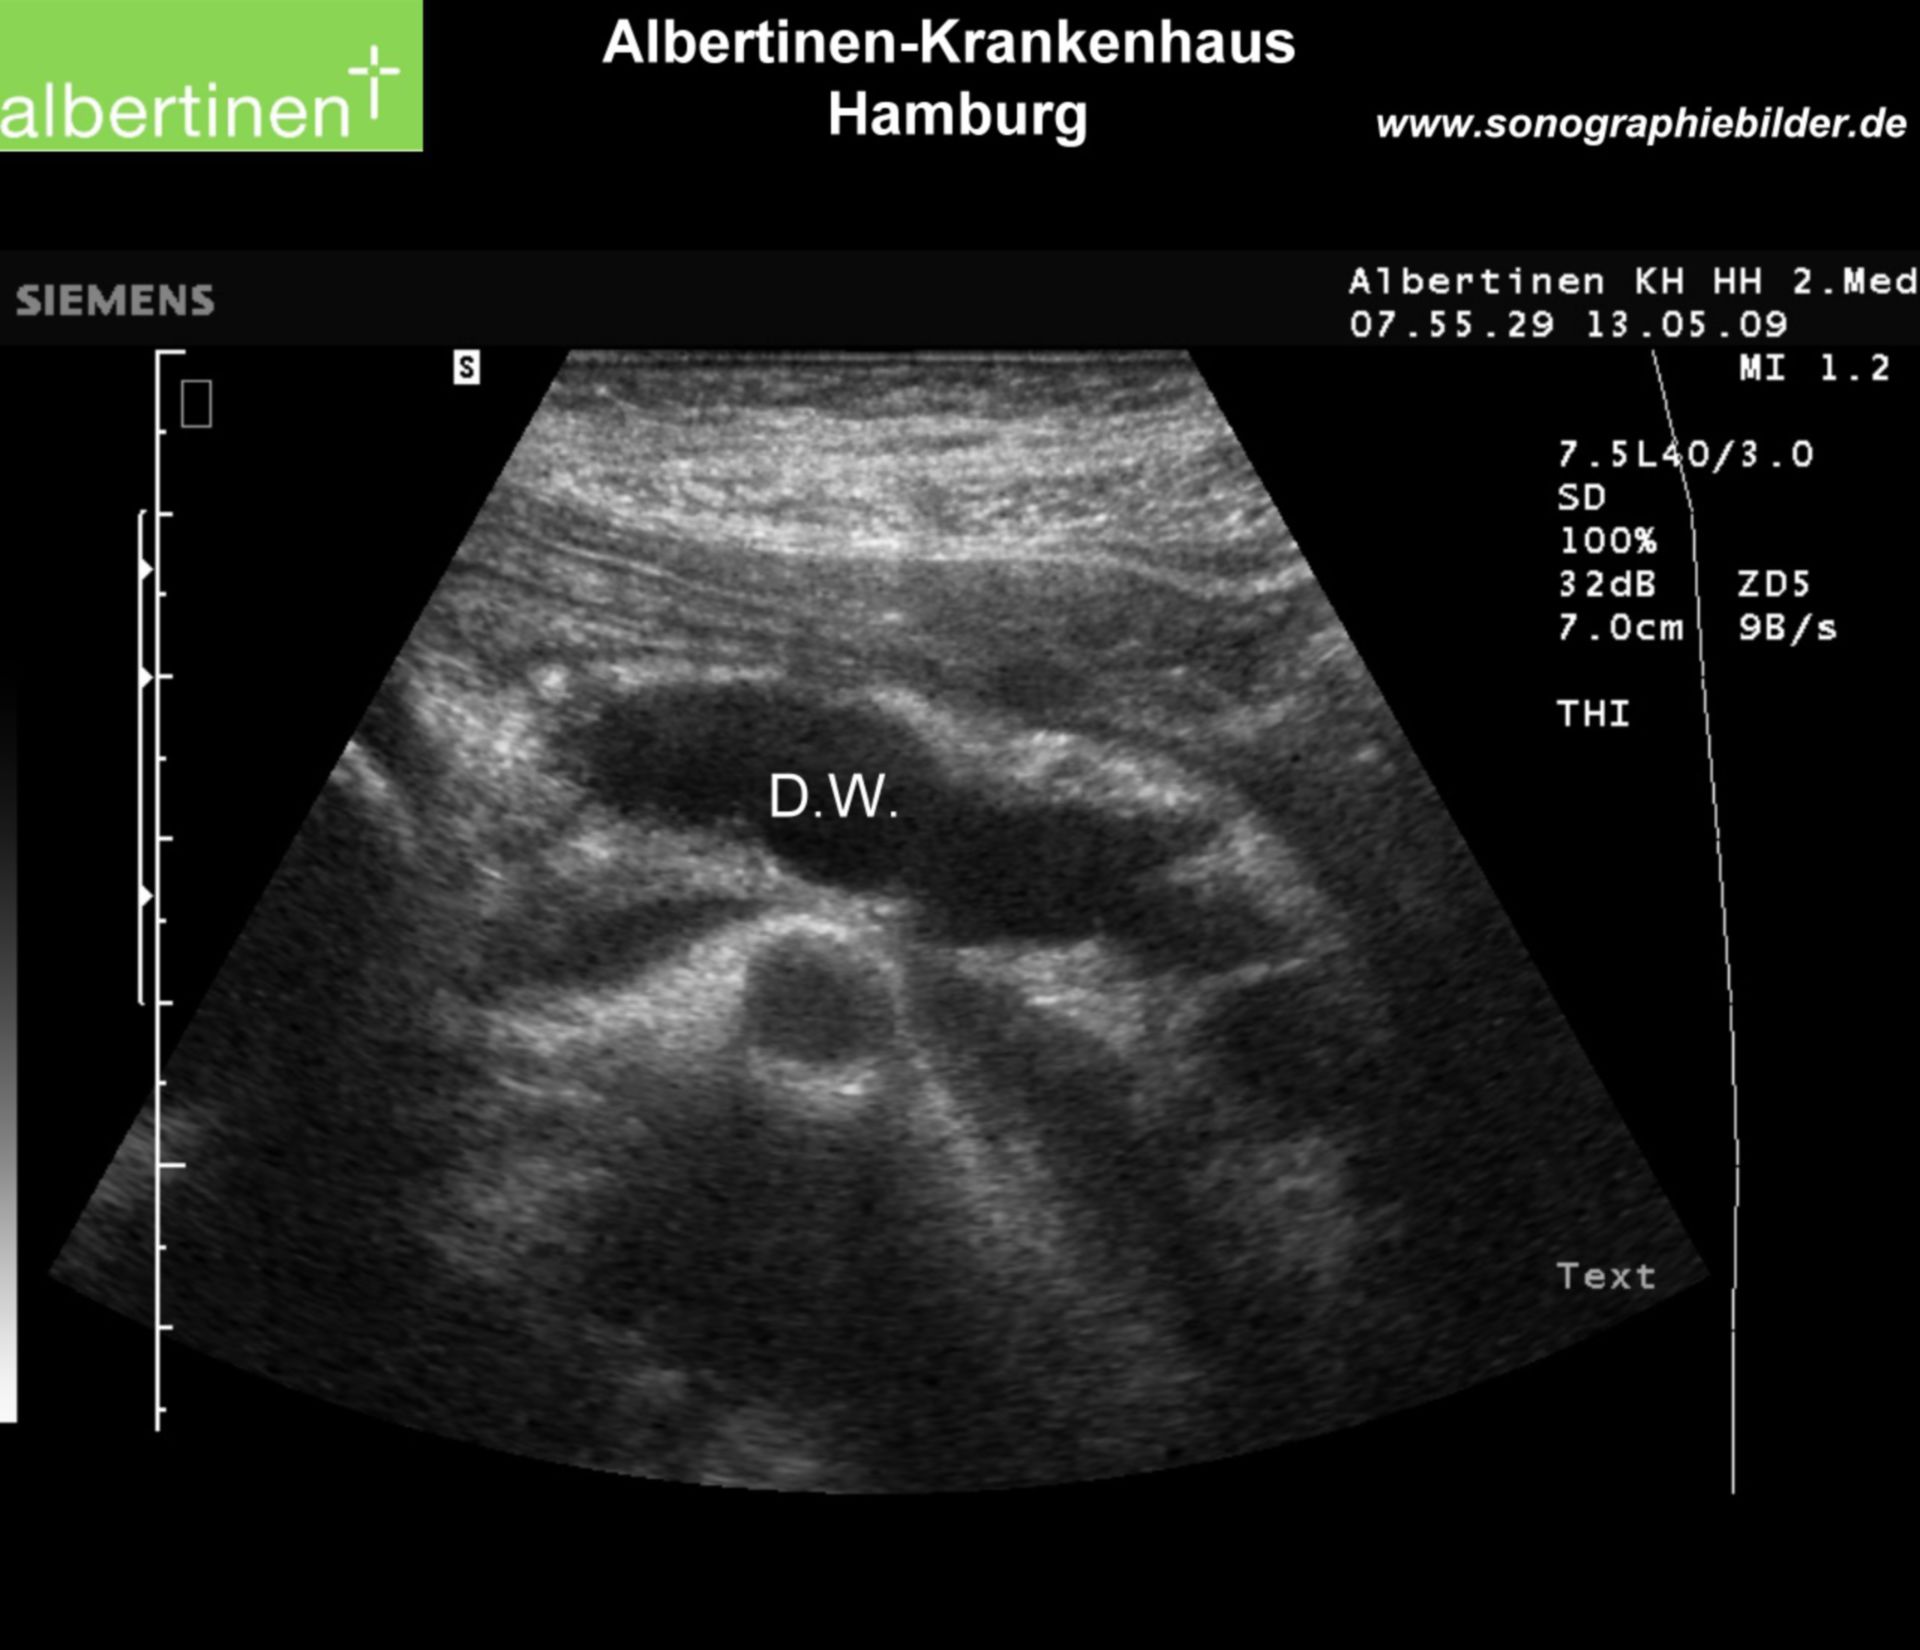 Chronic pancreatitis with dilated duct (ultrasound, text)